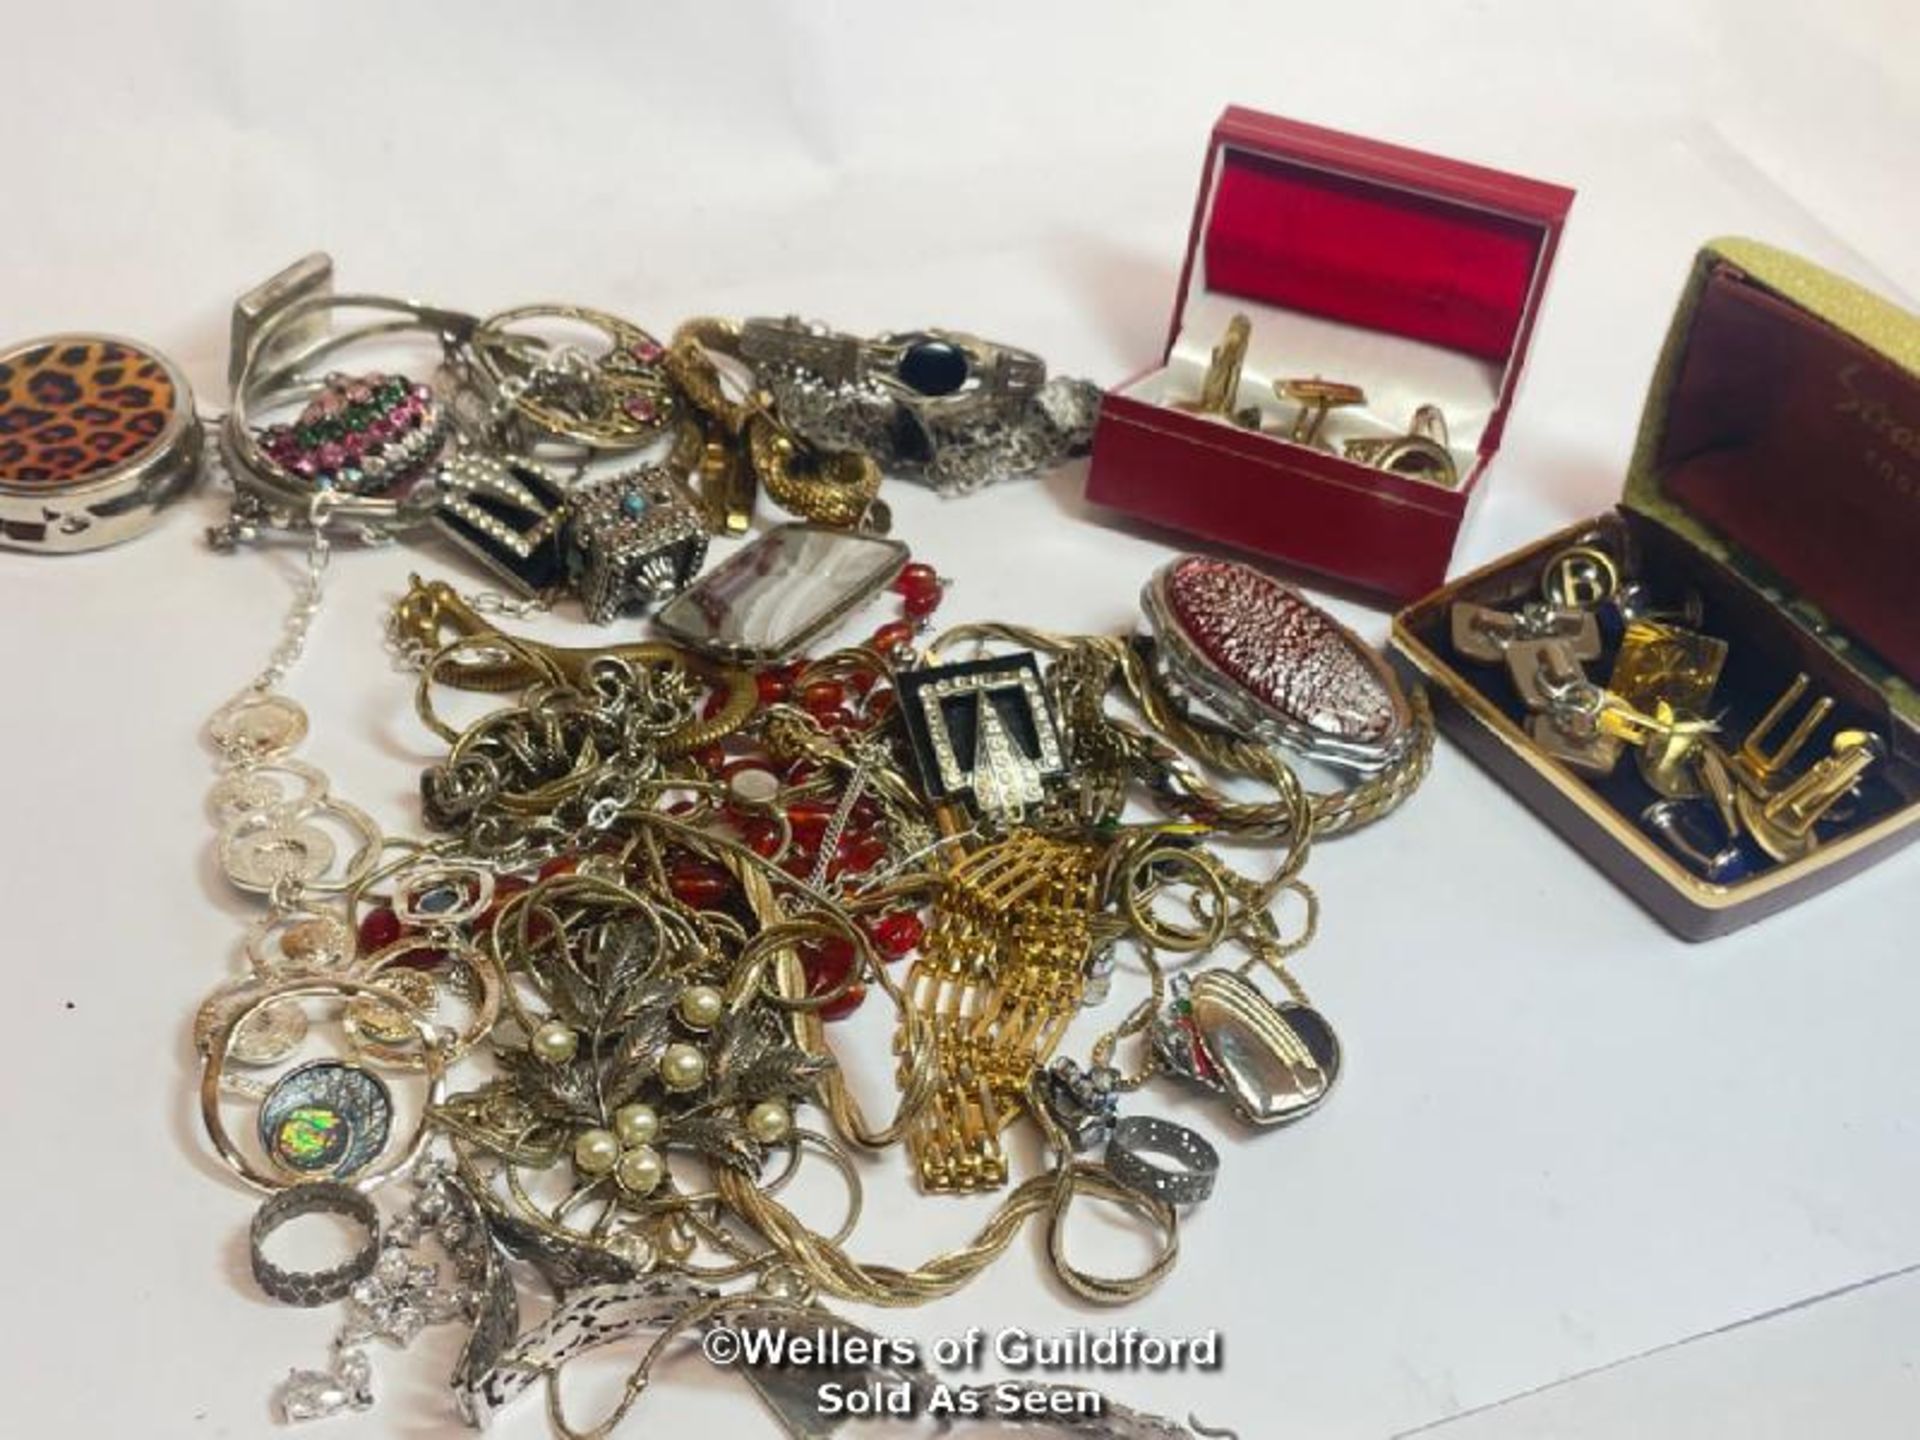 Assorted costume jewellery including brooches, necklaces, bangles and cufflinks